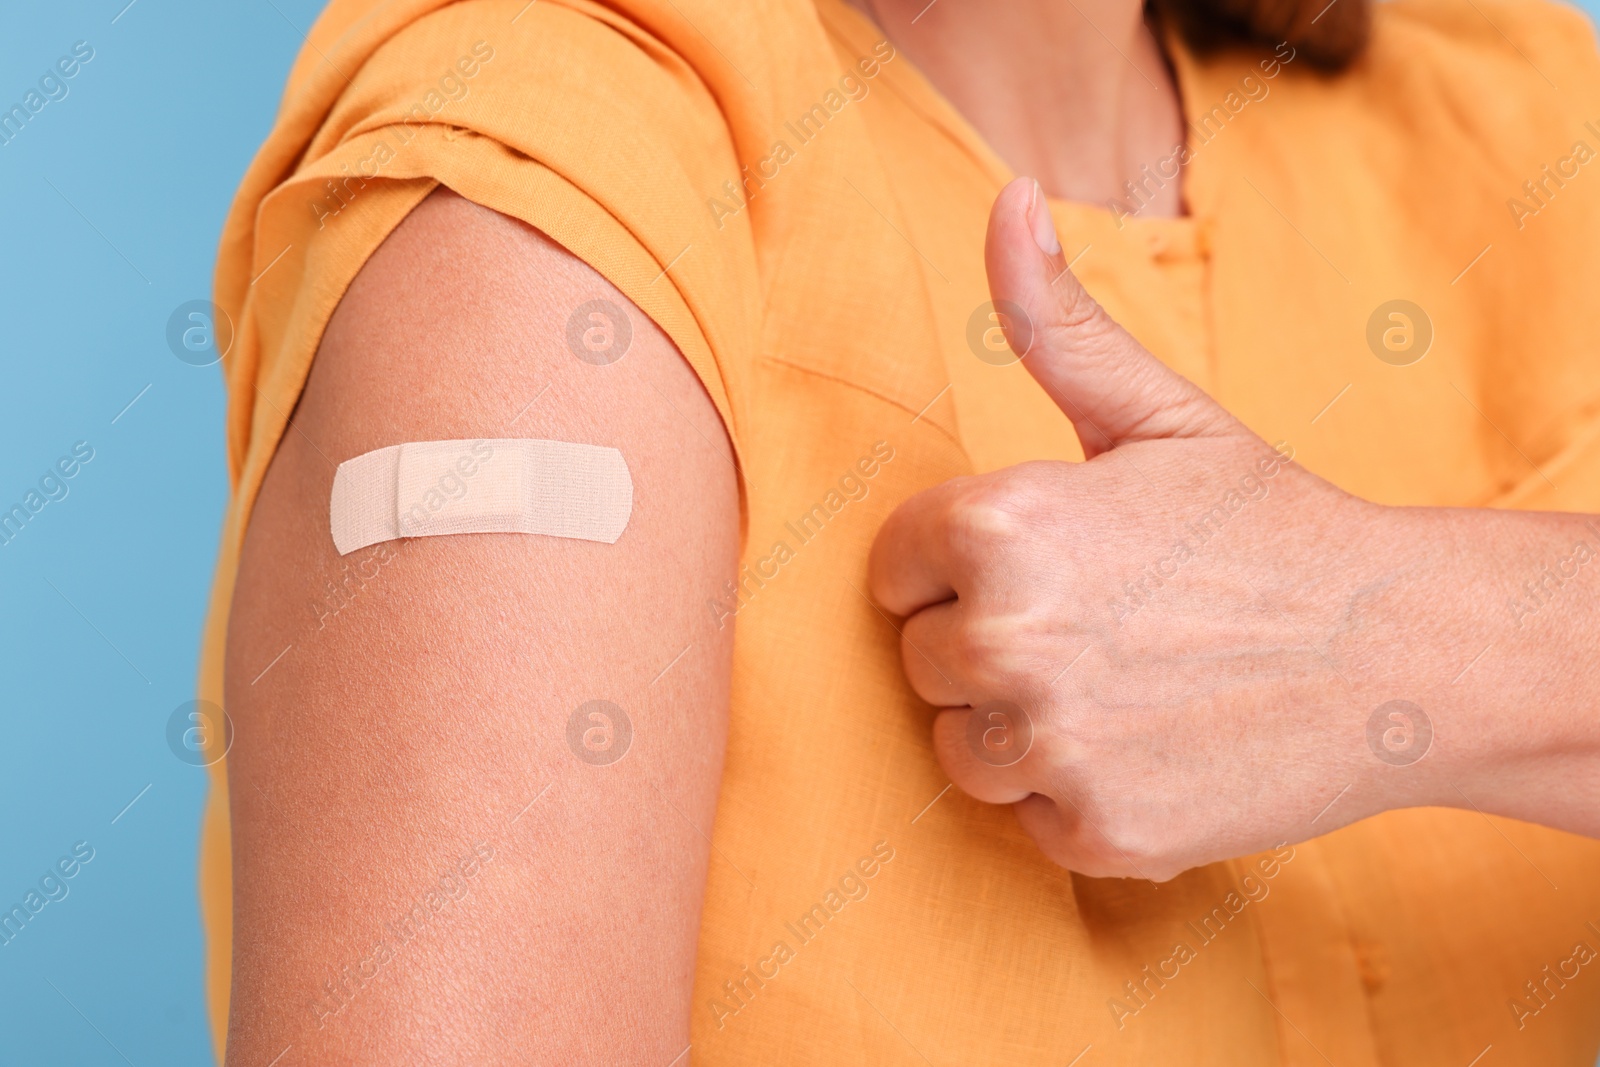 Photo of Woman with adhesive bandage on her arm after vaccination showing thumb up against light blue background, closeup